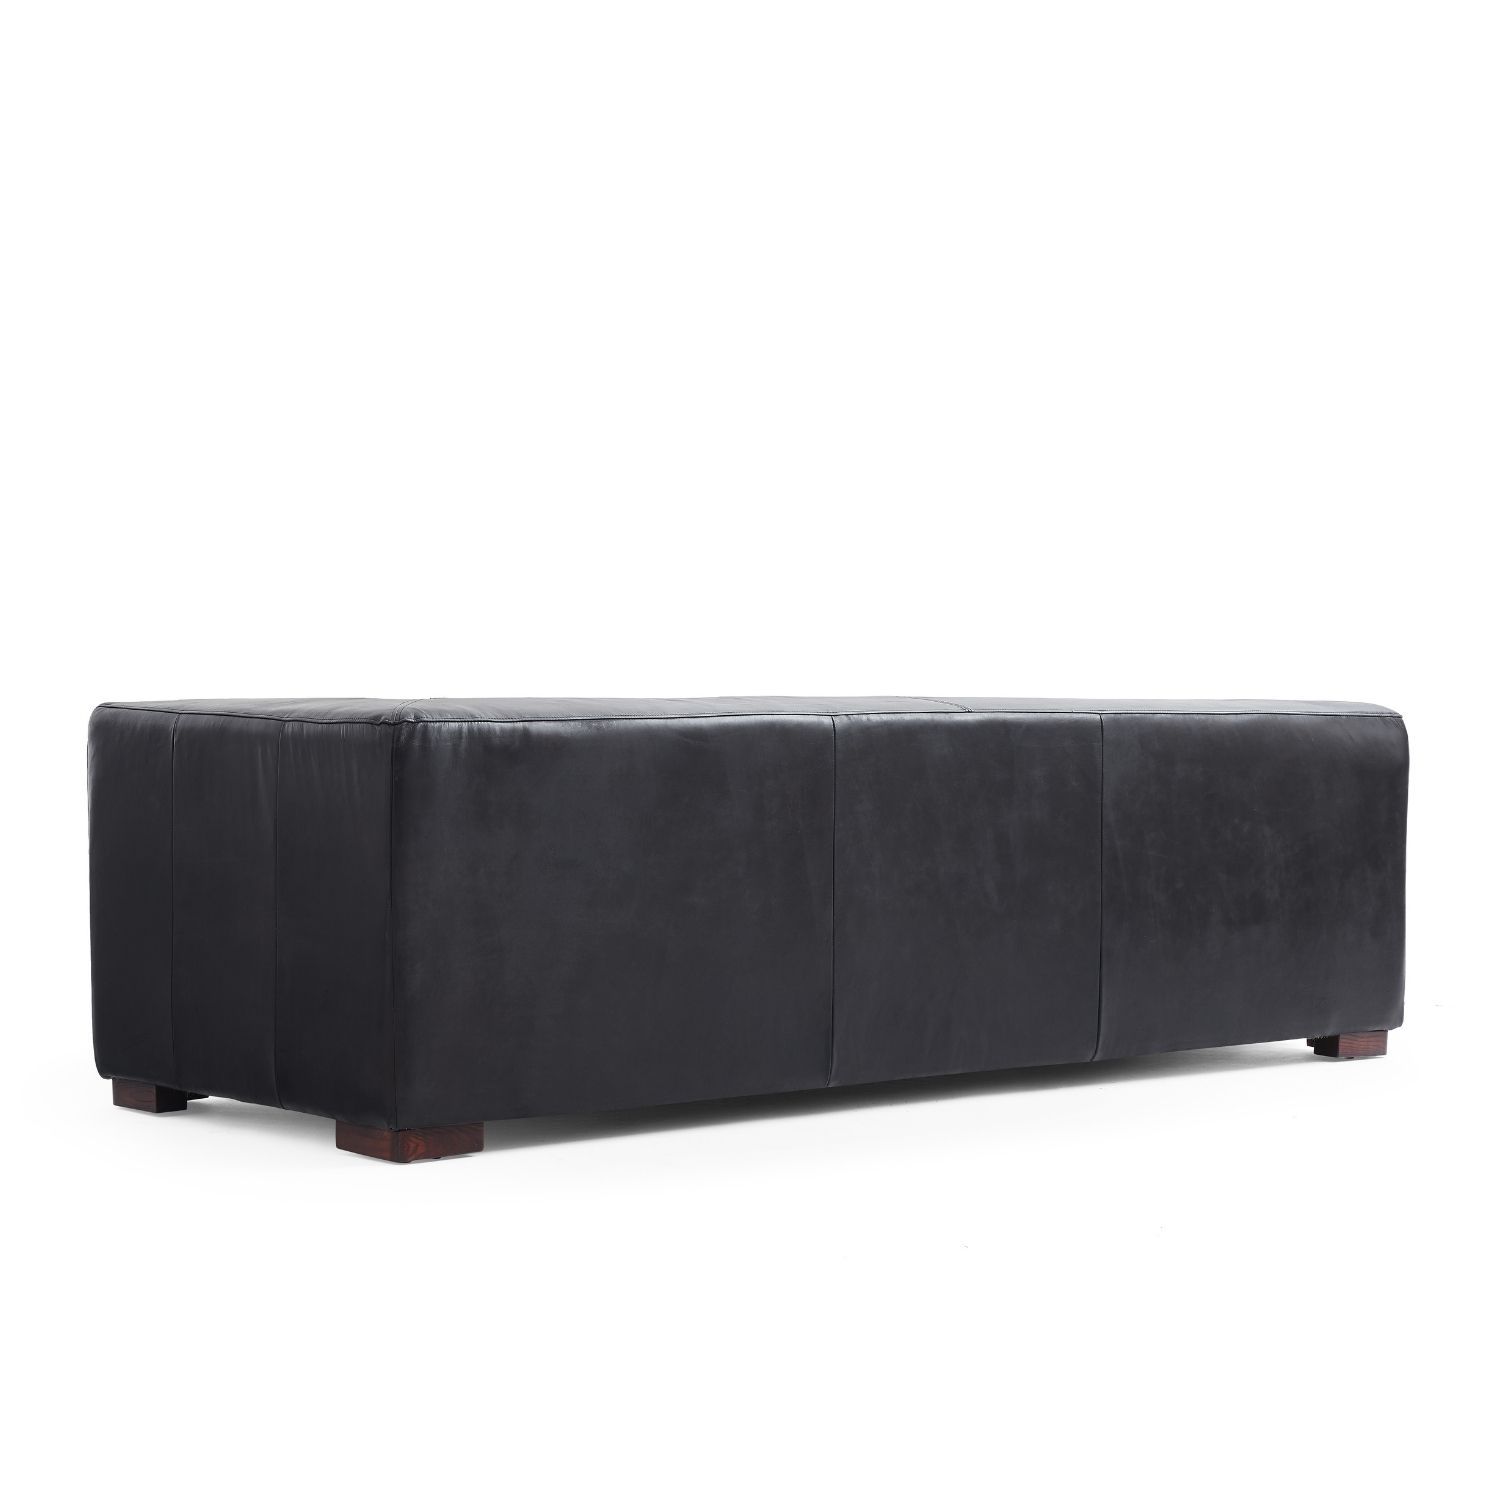 Gillow Sofa Bed Foundry 